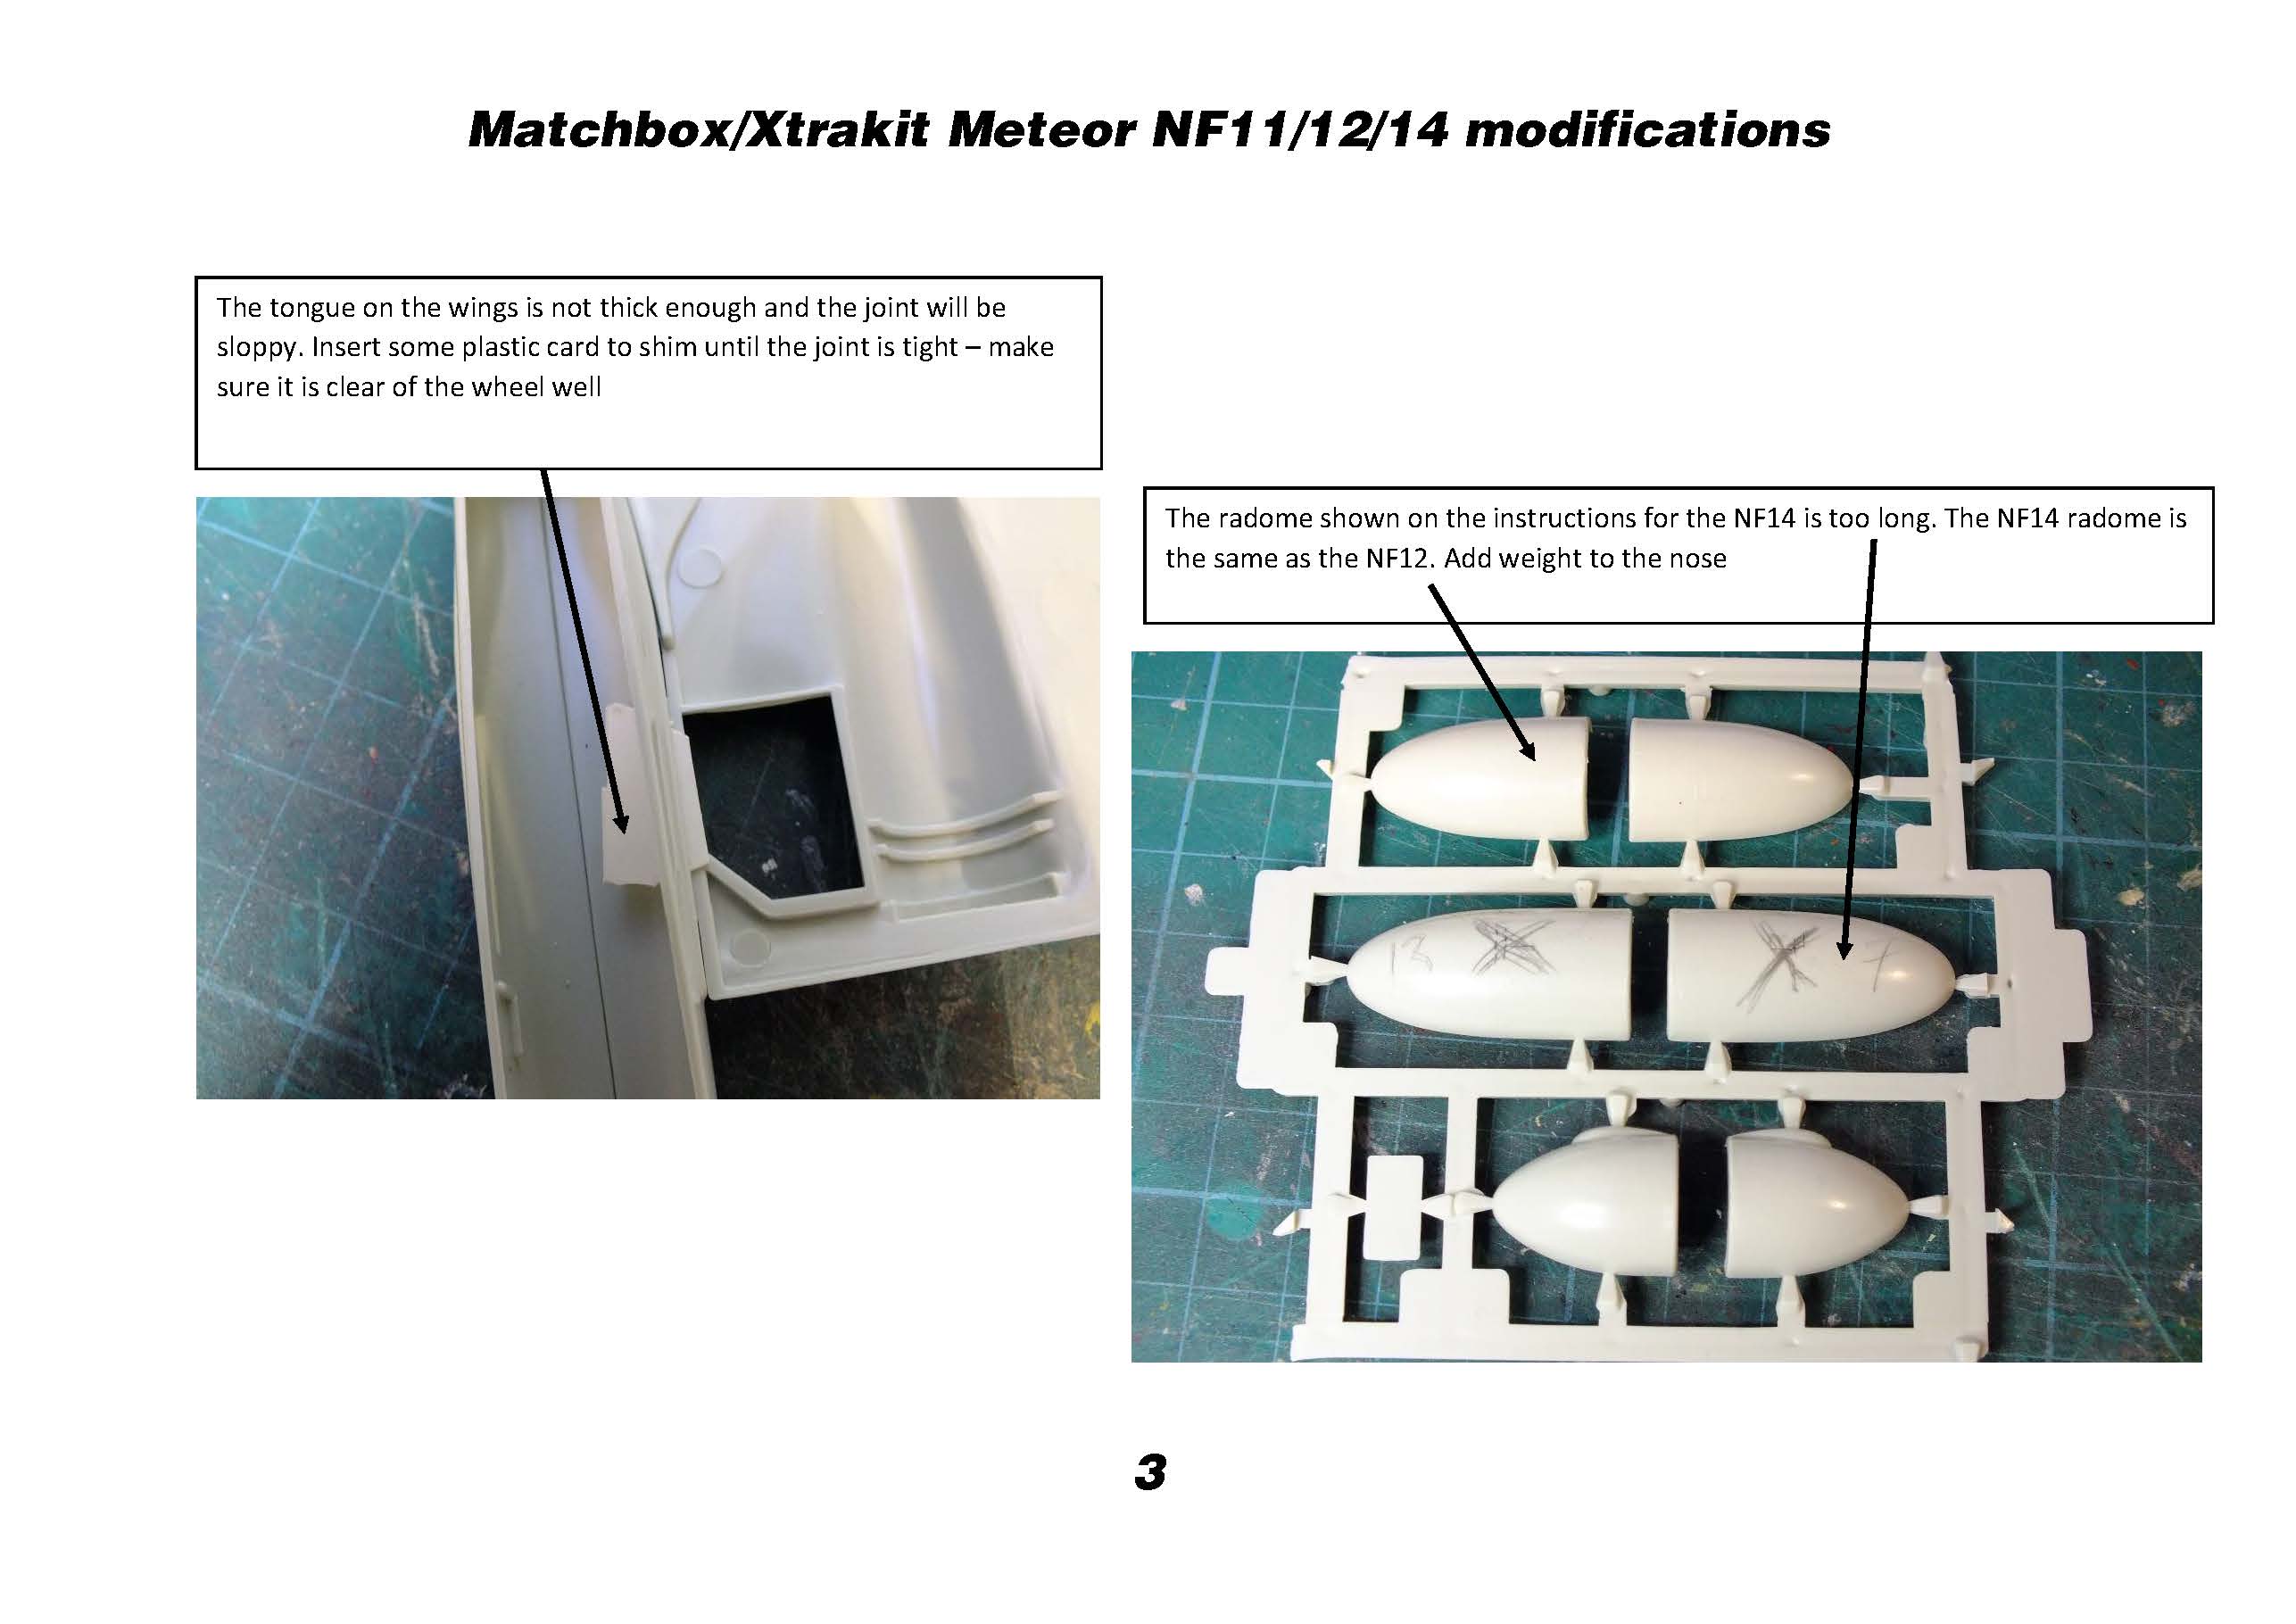 NF kit modifications_Page_3.jpg  by Britjet